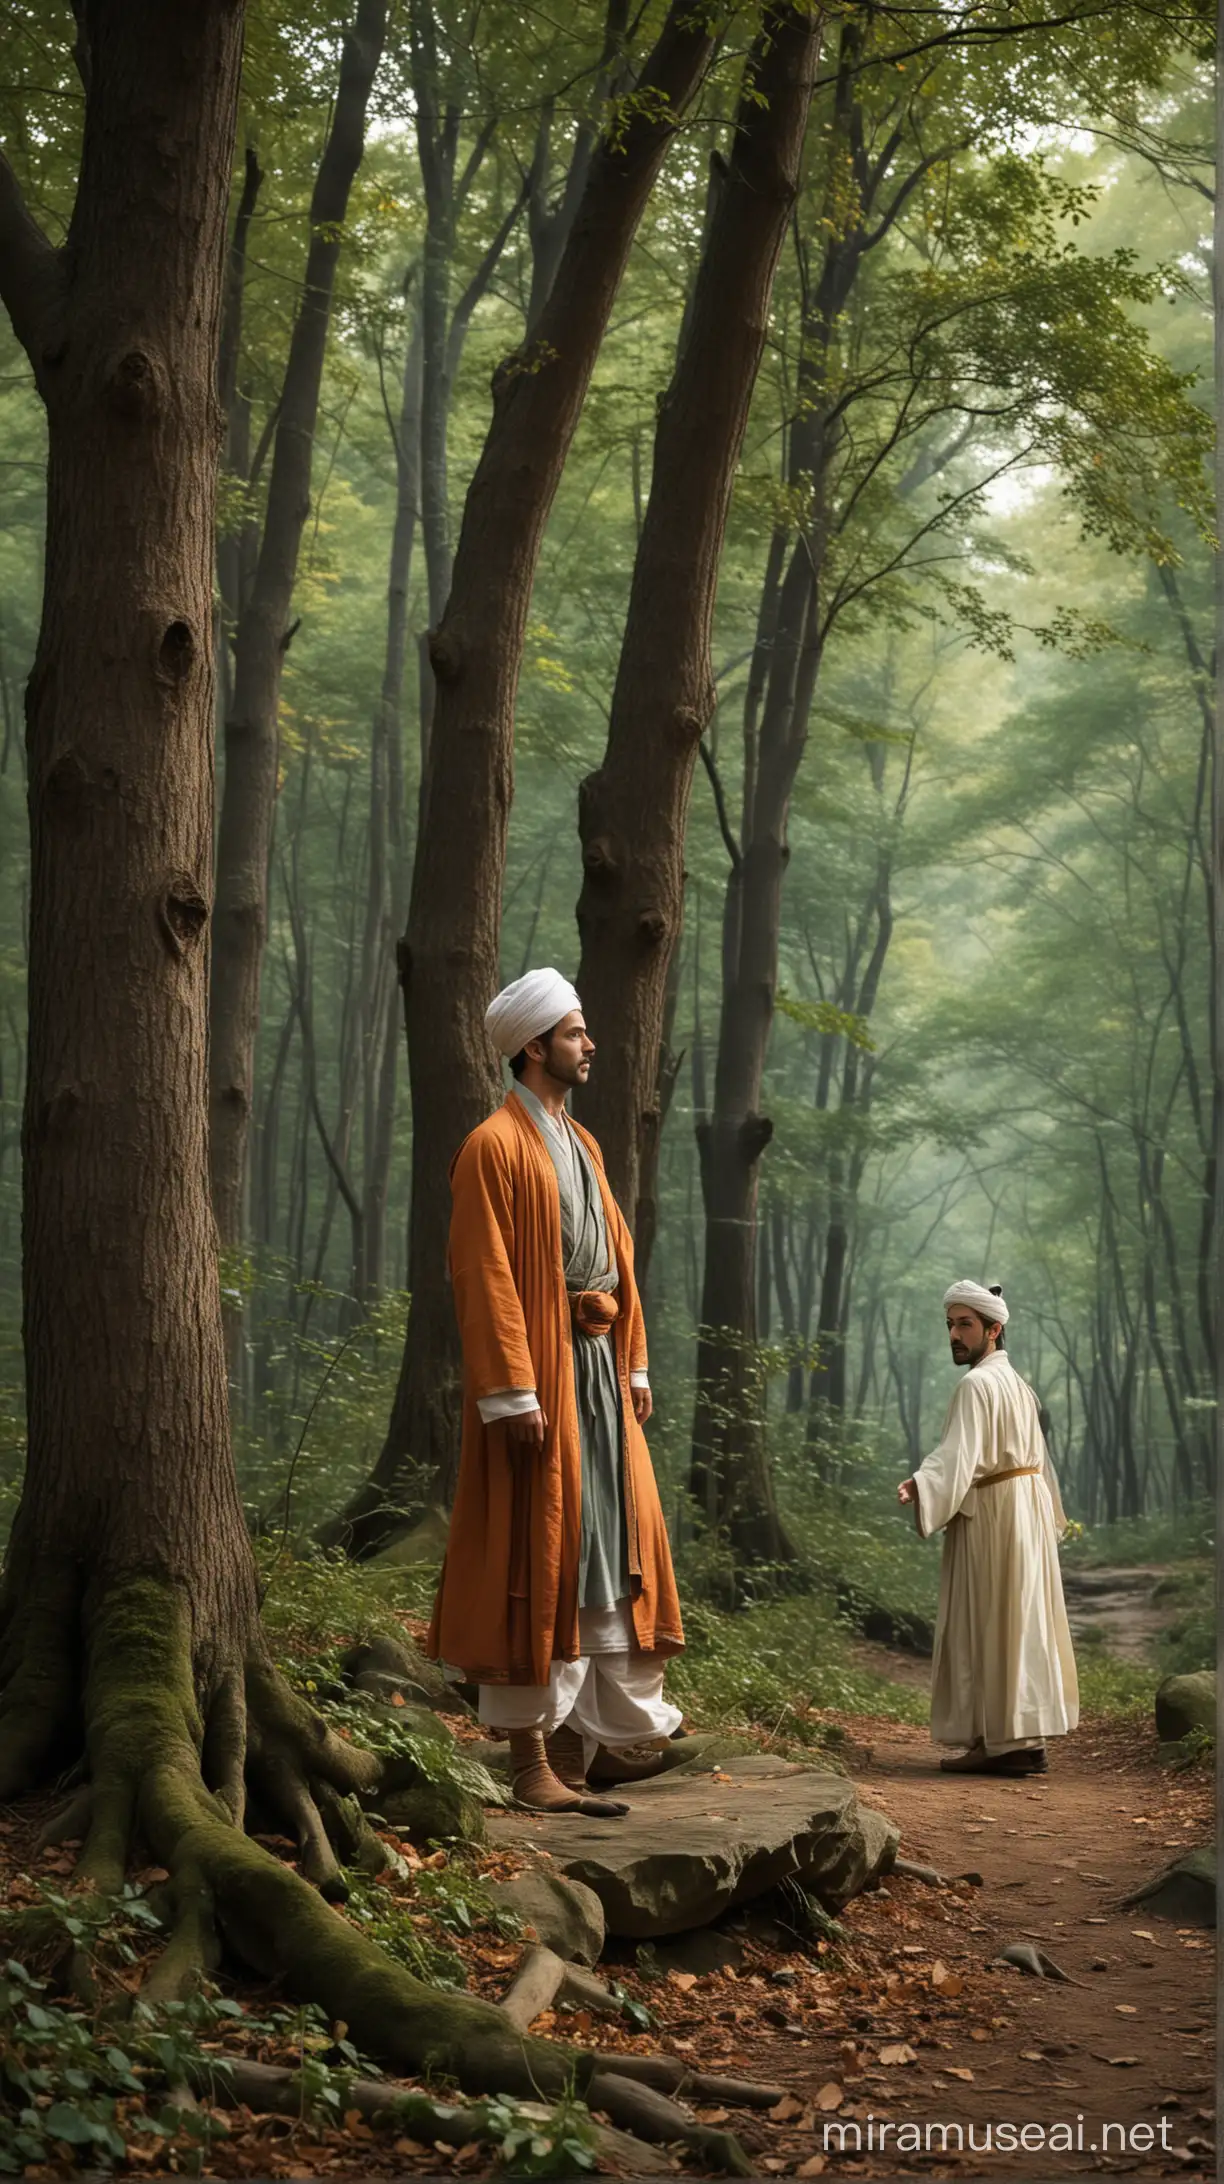 Young Princes Transformation into Dervish Amidst Enchanted Forest